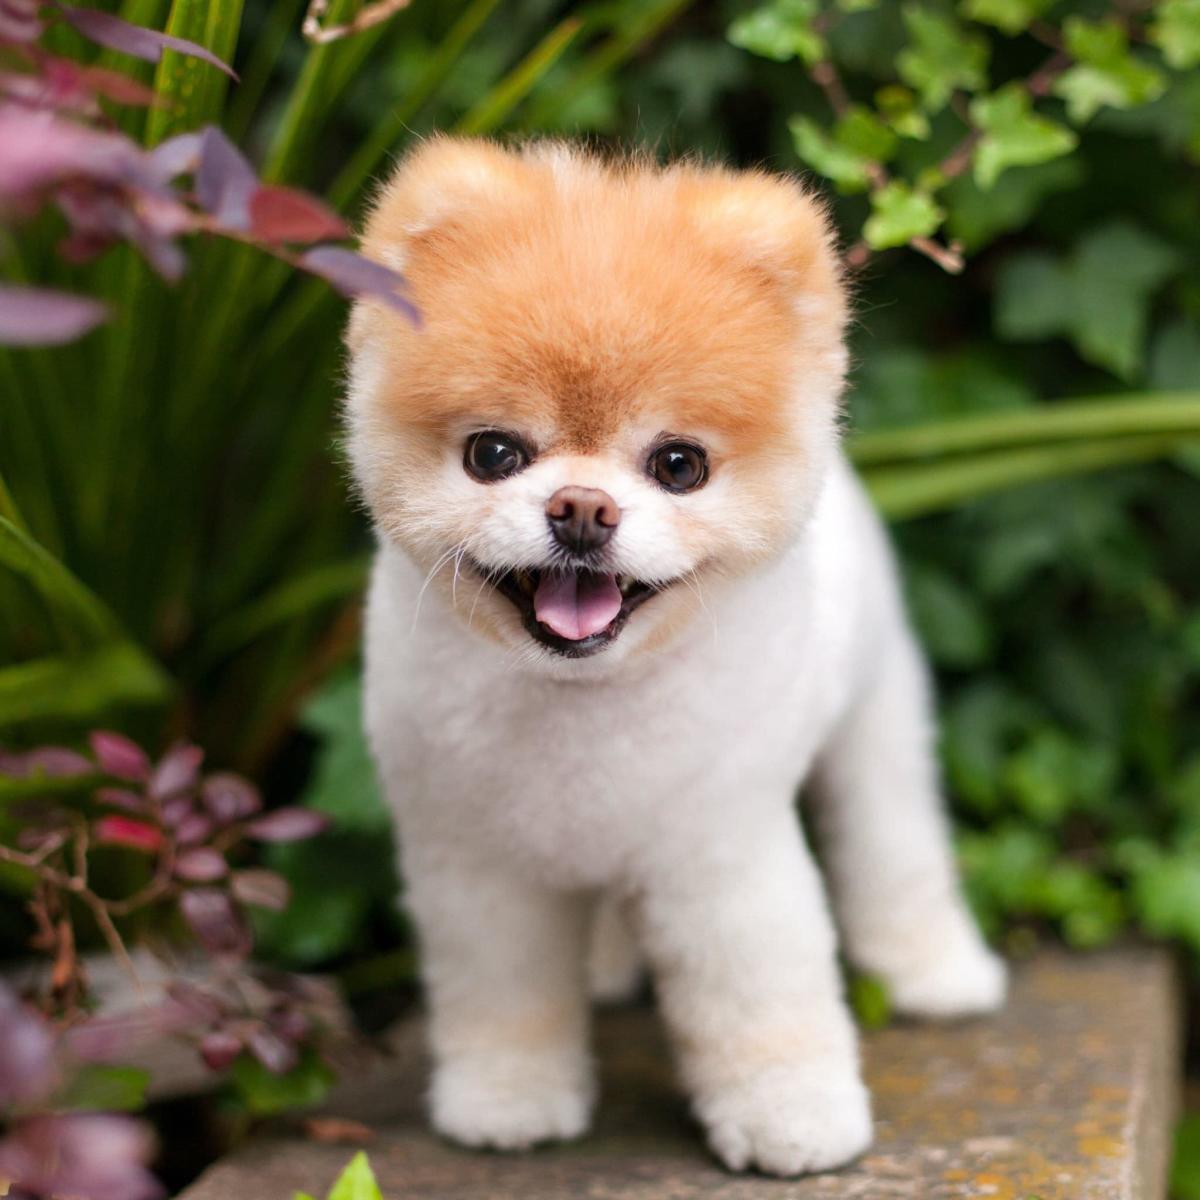 Is Boo the 'cutest dog' in the world a Facebook plant?